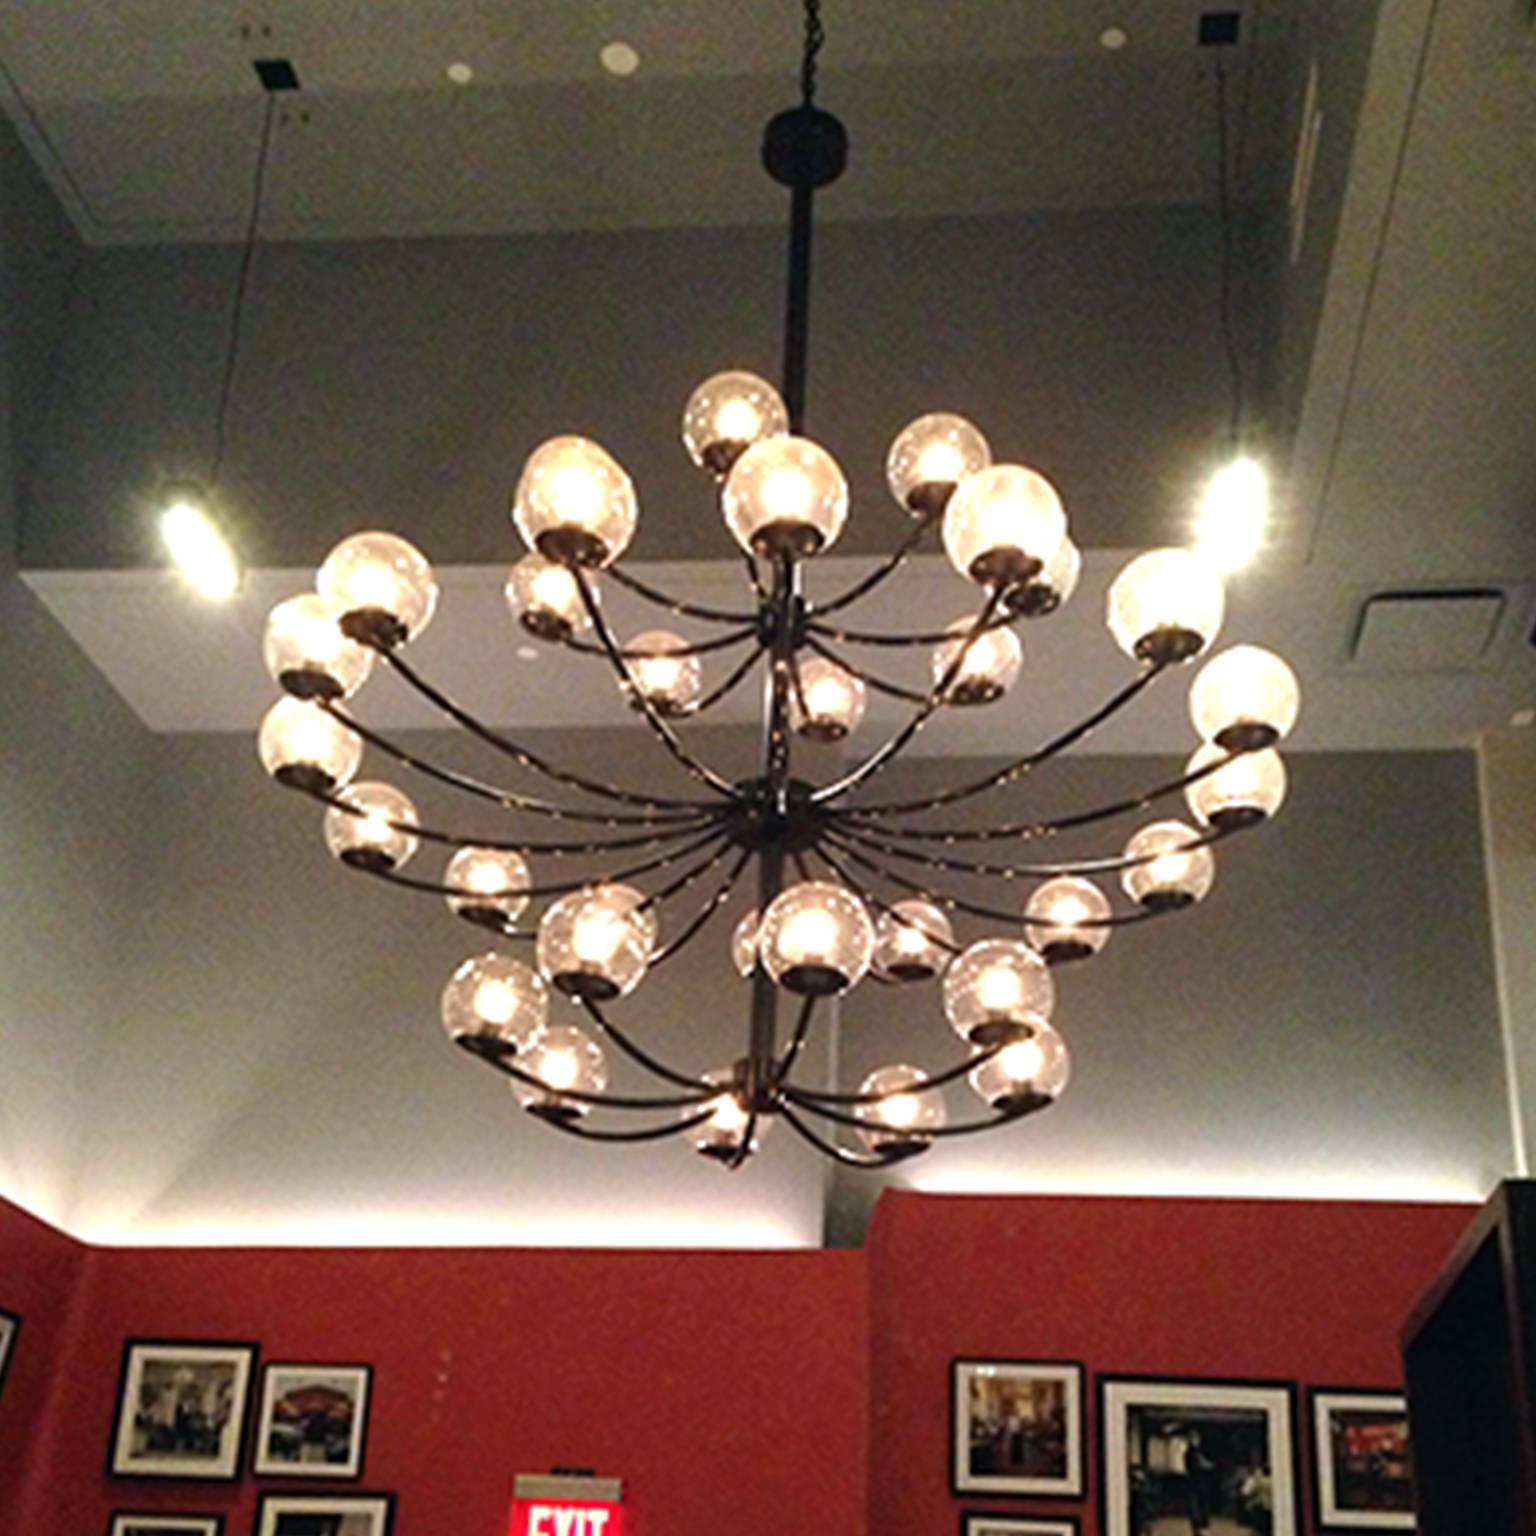 1940s chandelier - hand crafted in our Tribeca studio and showroom. 
Metal / brass / burnt steel / finishes.
Blackened.
Metalwork.
Welded
Glass.

Measures: 52″ W x 54″ H.
Approximate lead time 11-12 weeks.
Additional custom sizes and finishes